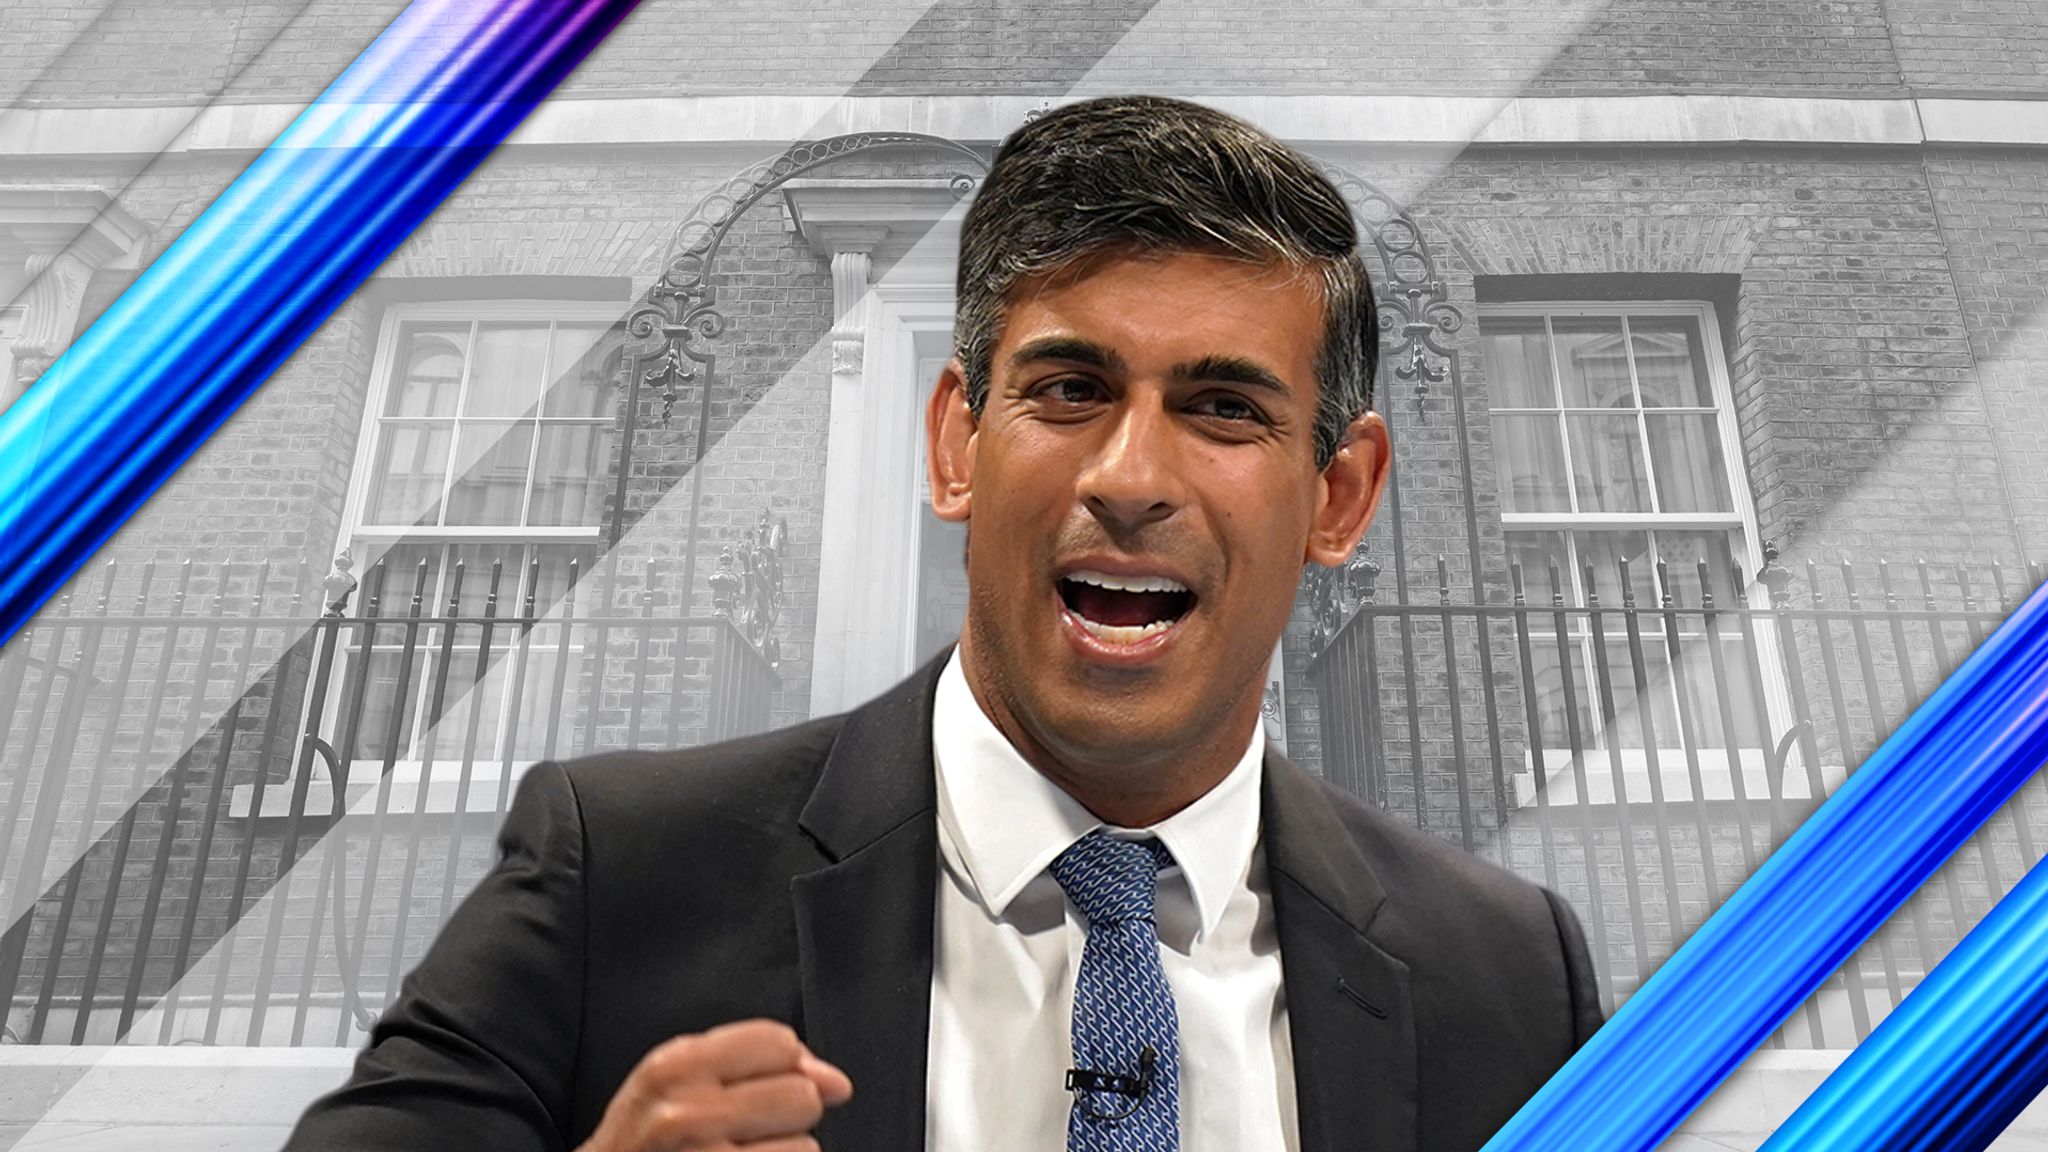 Rishi Sunak to take charge as UK Prime Minister after meeting King Charles